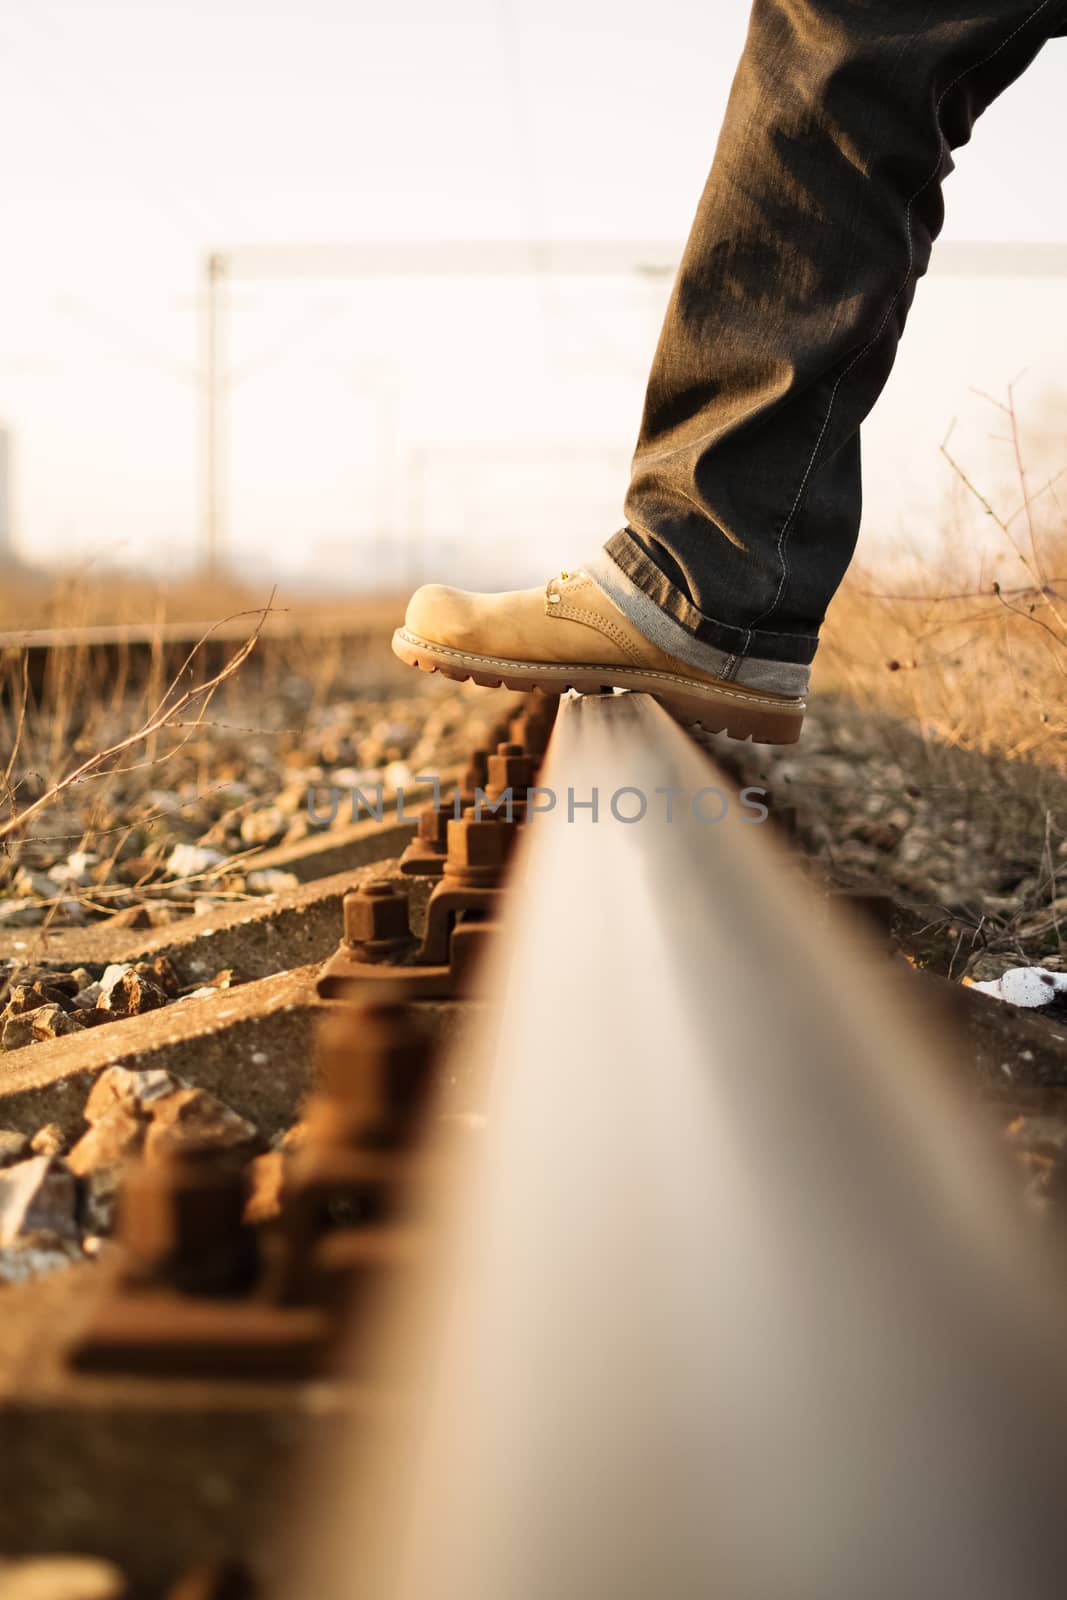 Time for a new journey. Man's foot stepping over train tracks.